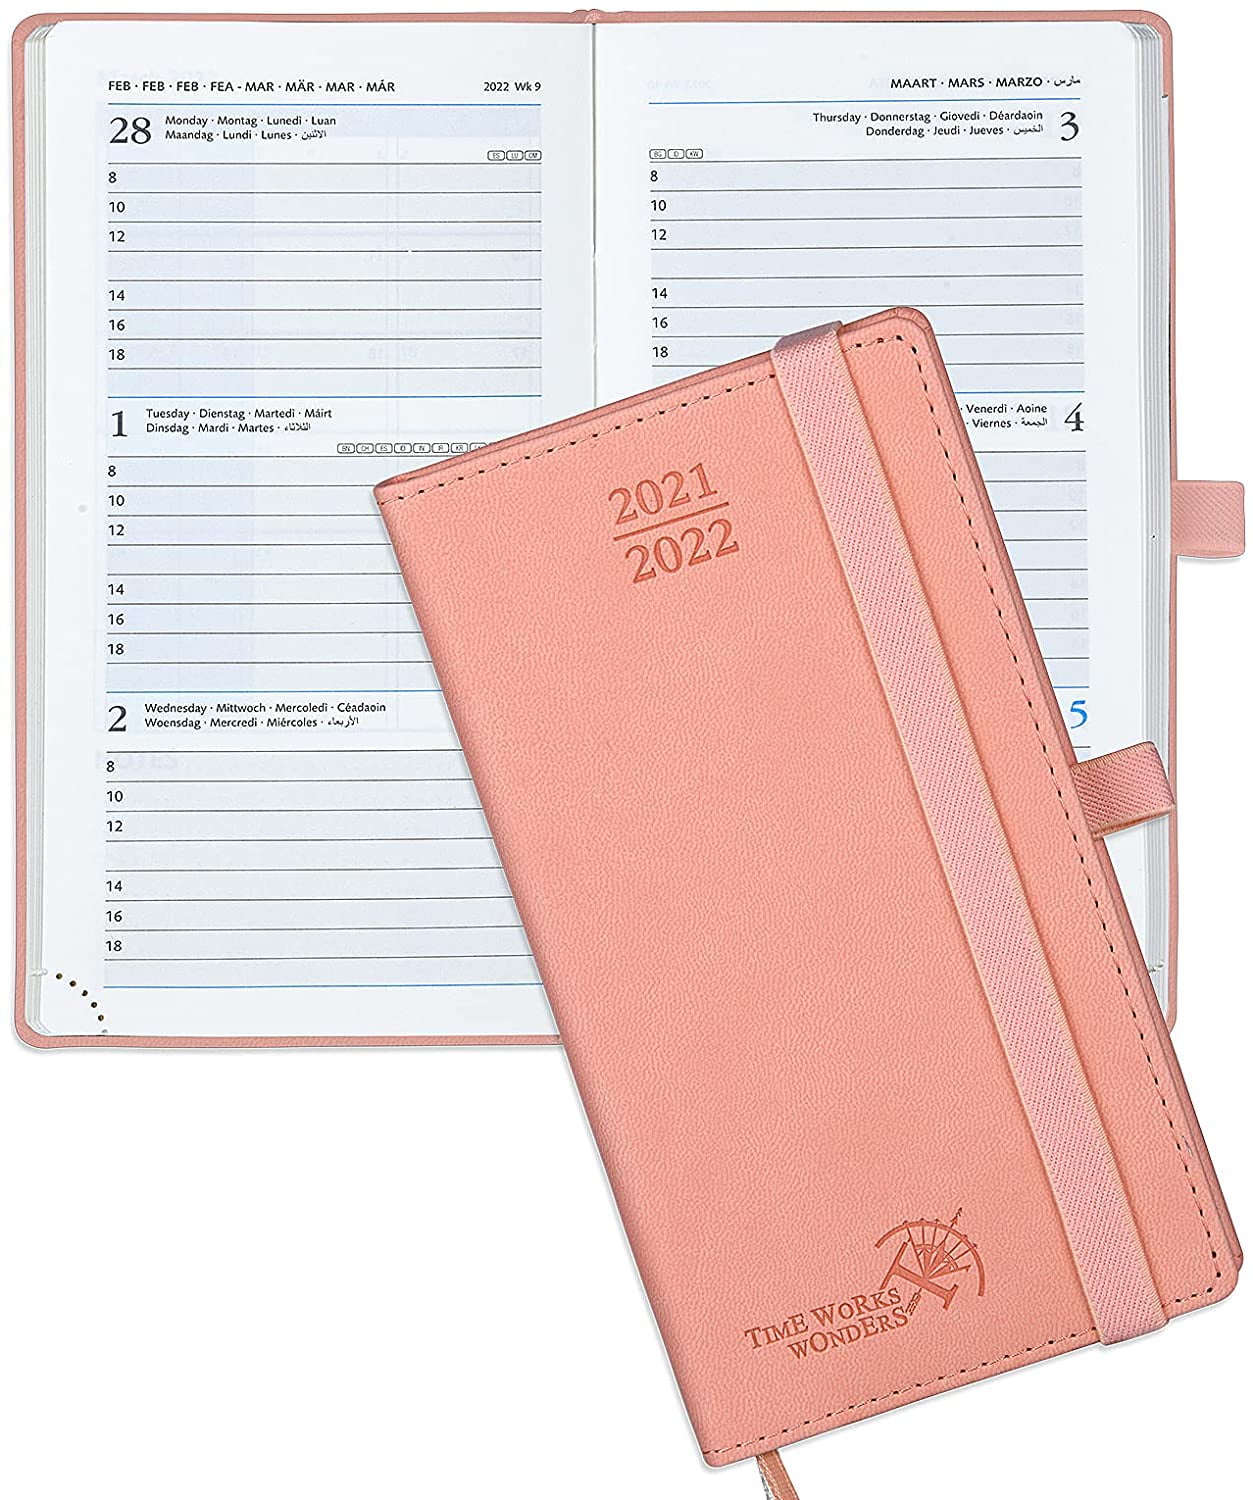 2021 Planner Weekly & Monthly Pocket Calendar Small Size 3-1/2 x 6 Vegan Leather Hard Cover Agenda 2021 with Note & Address Pages Green 